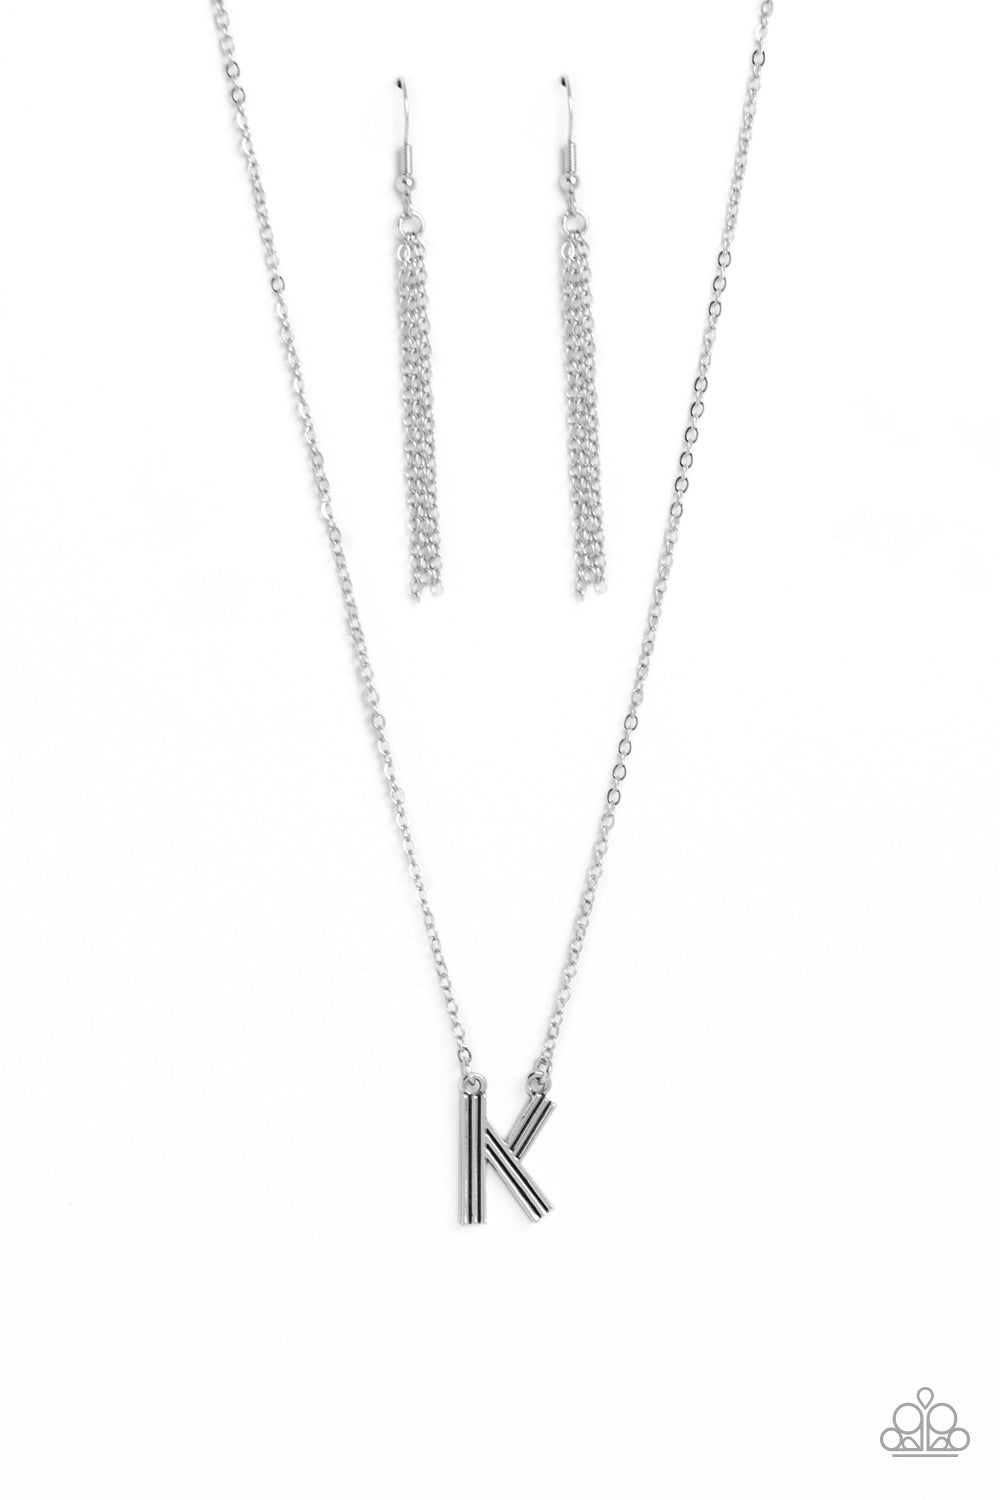 Leave Your Initials - Silver - K Paparazzi Necklace